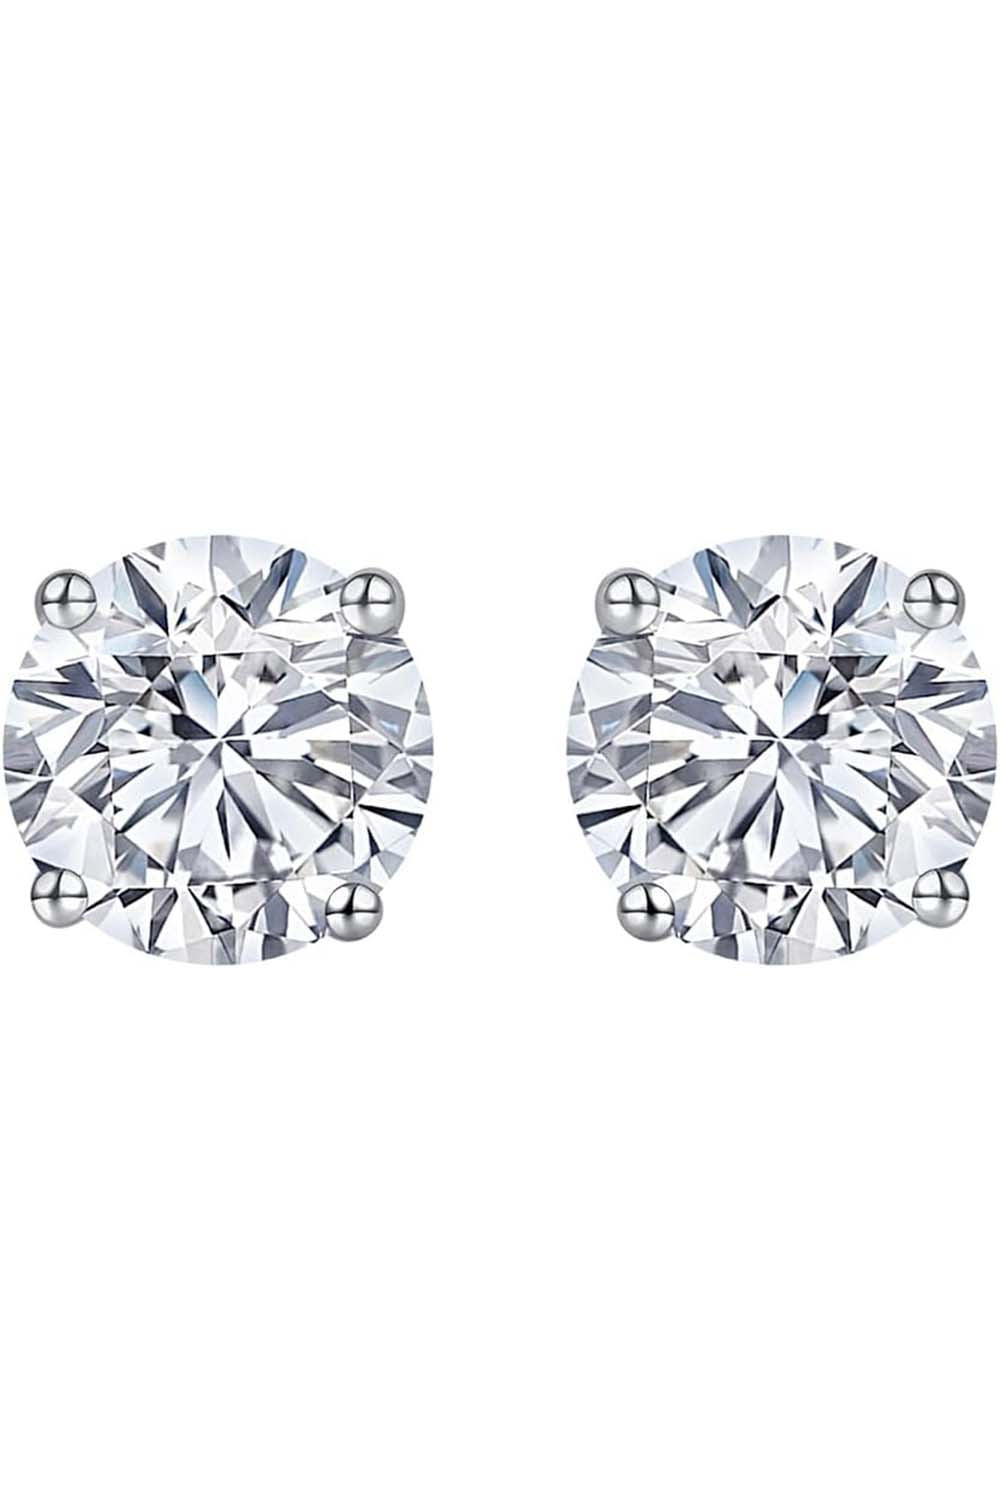 White Gold Color Vintage Solitaire Stud Earrings for Women